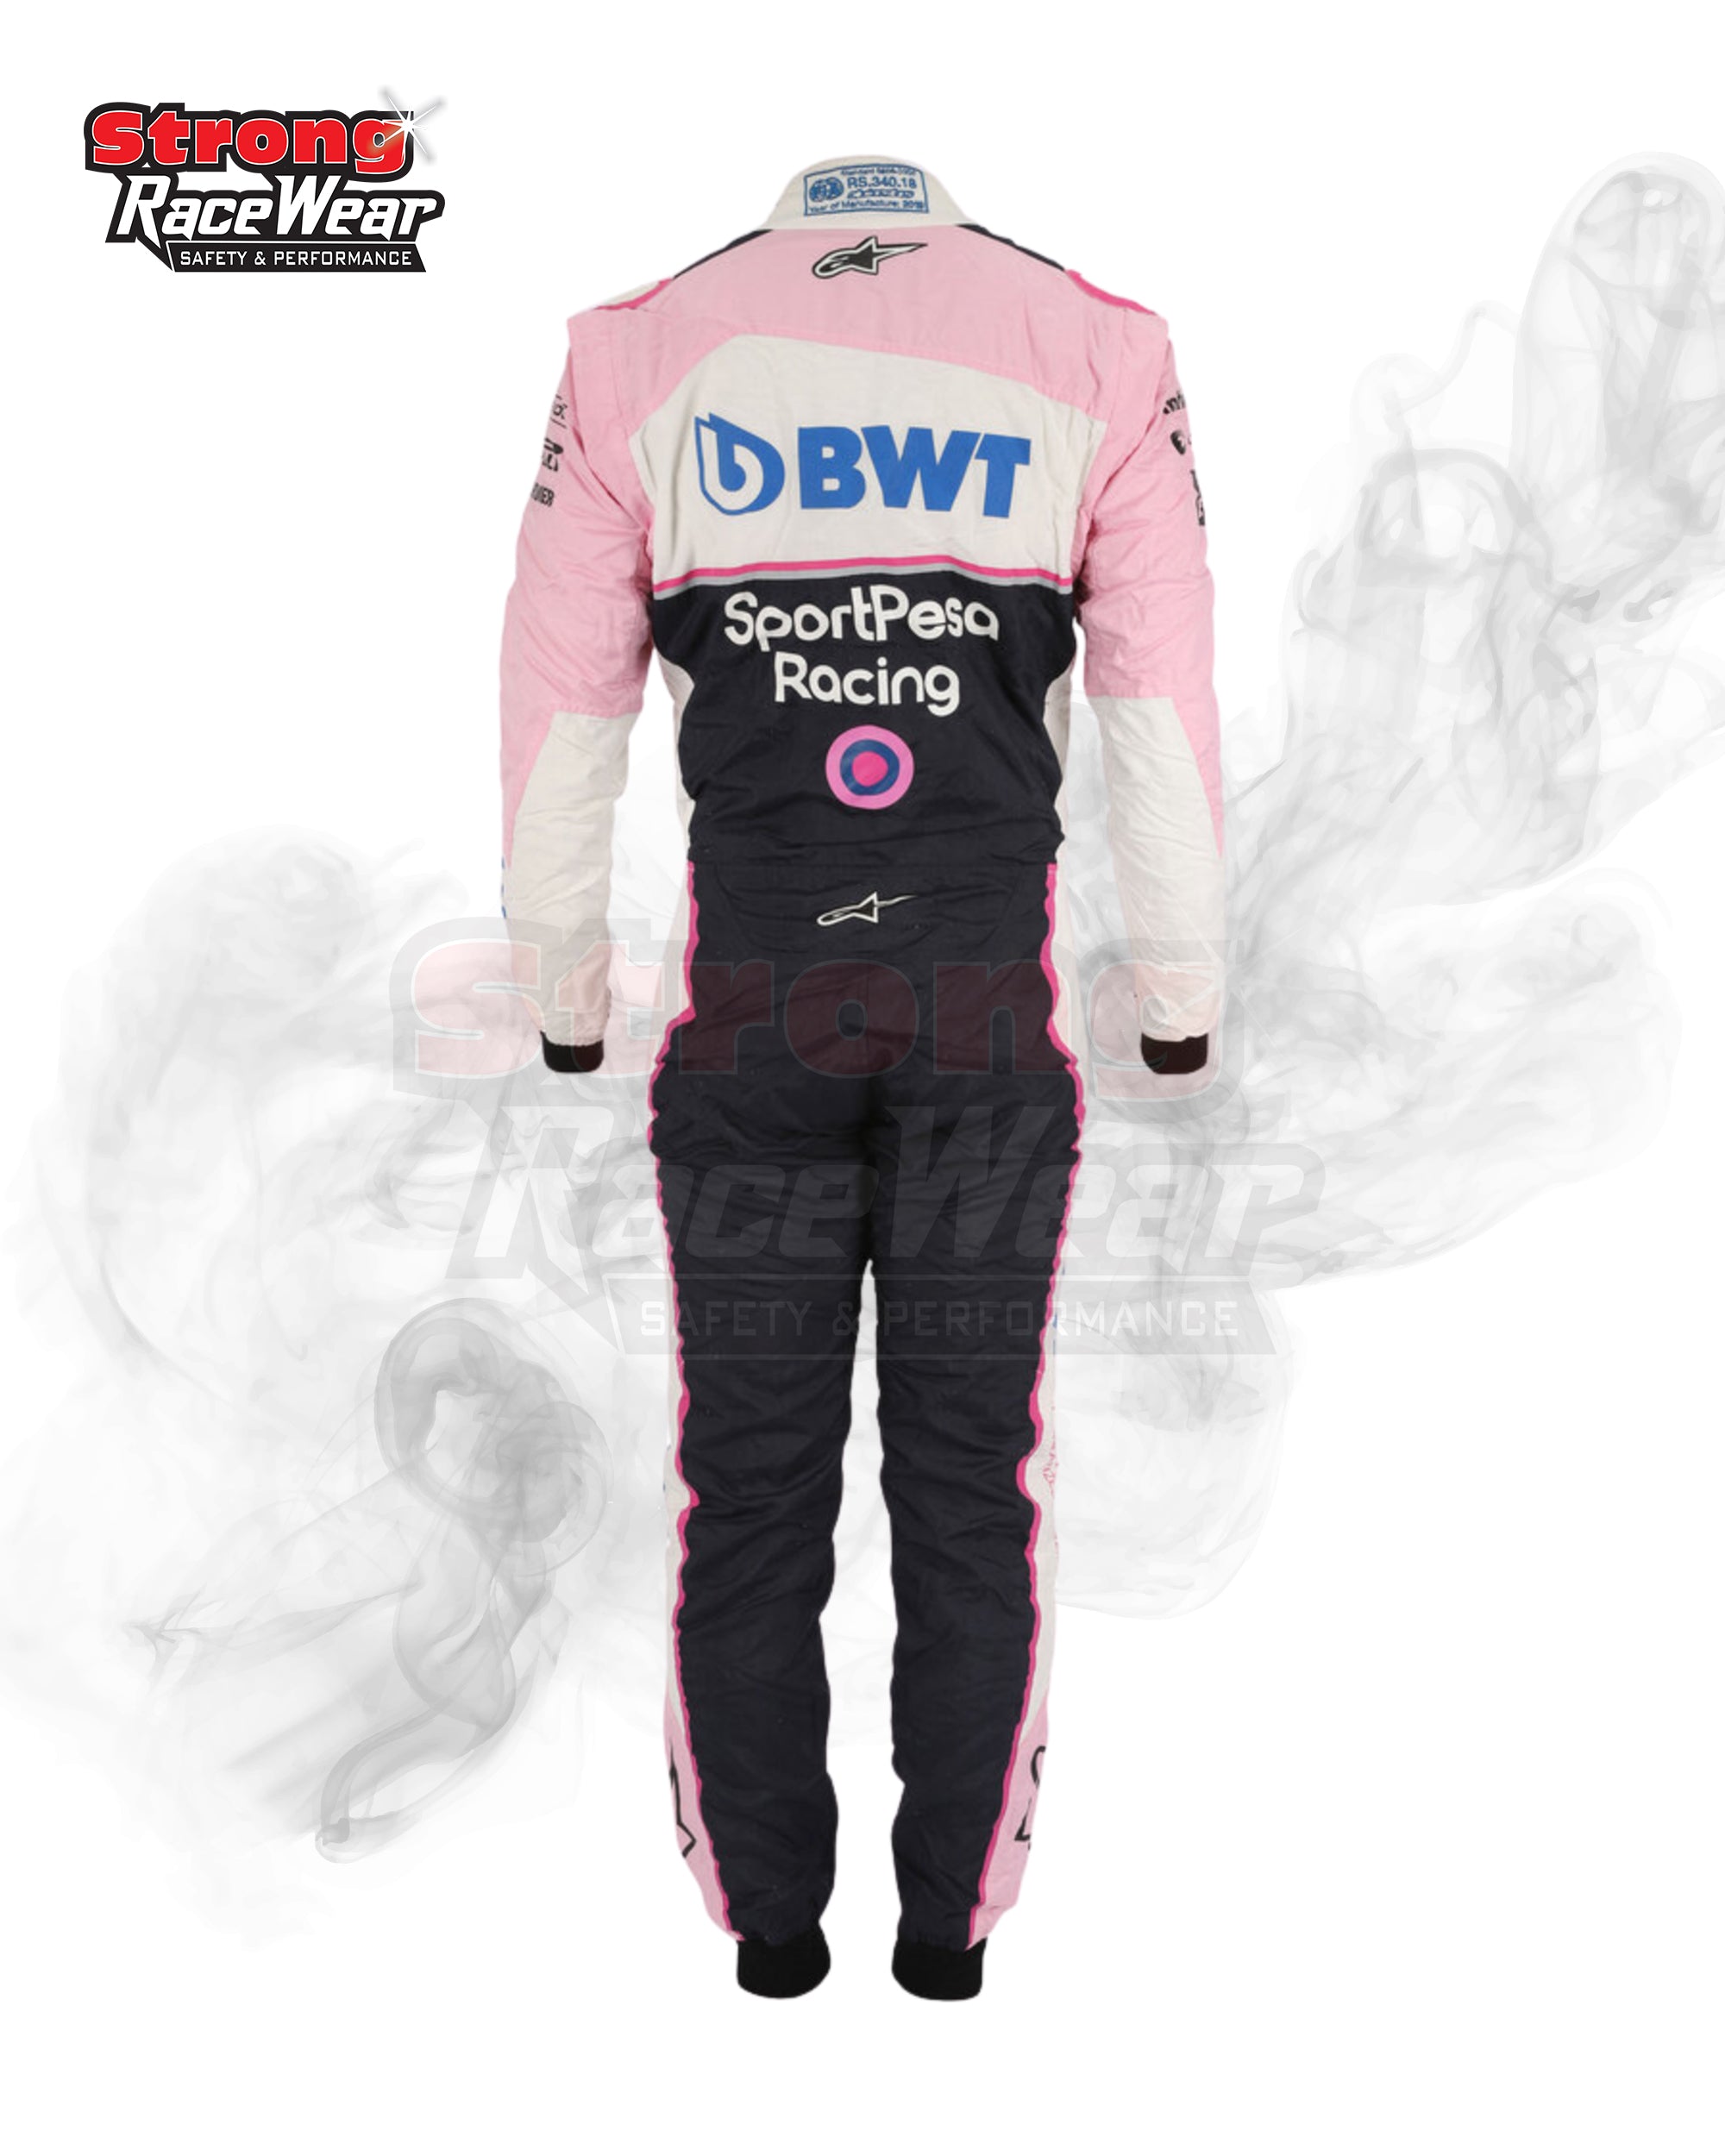 Lance Stroll Racing Point 2019 Race Suit